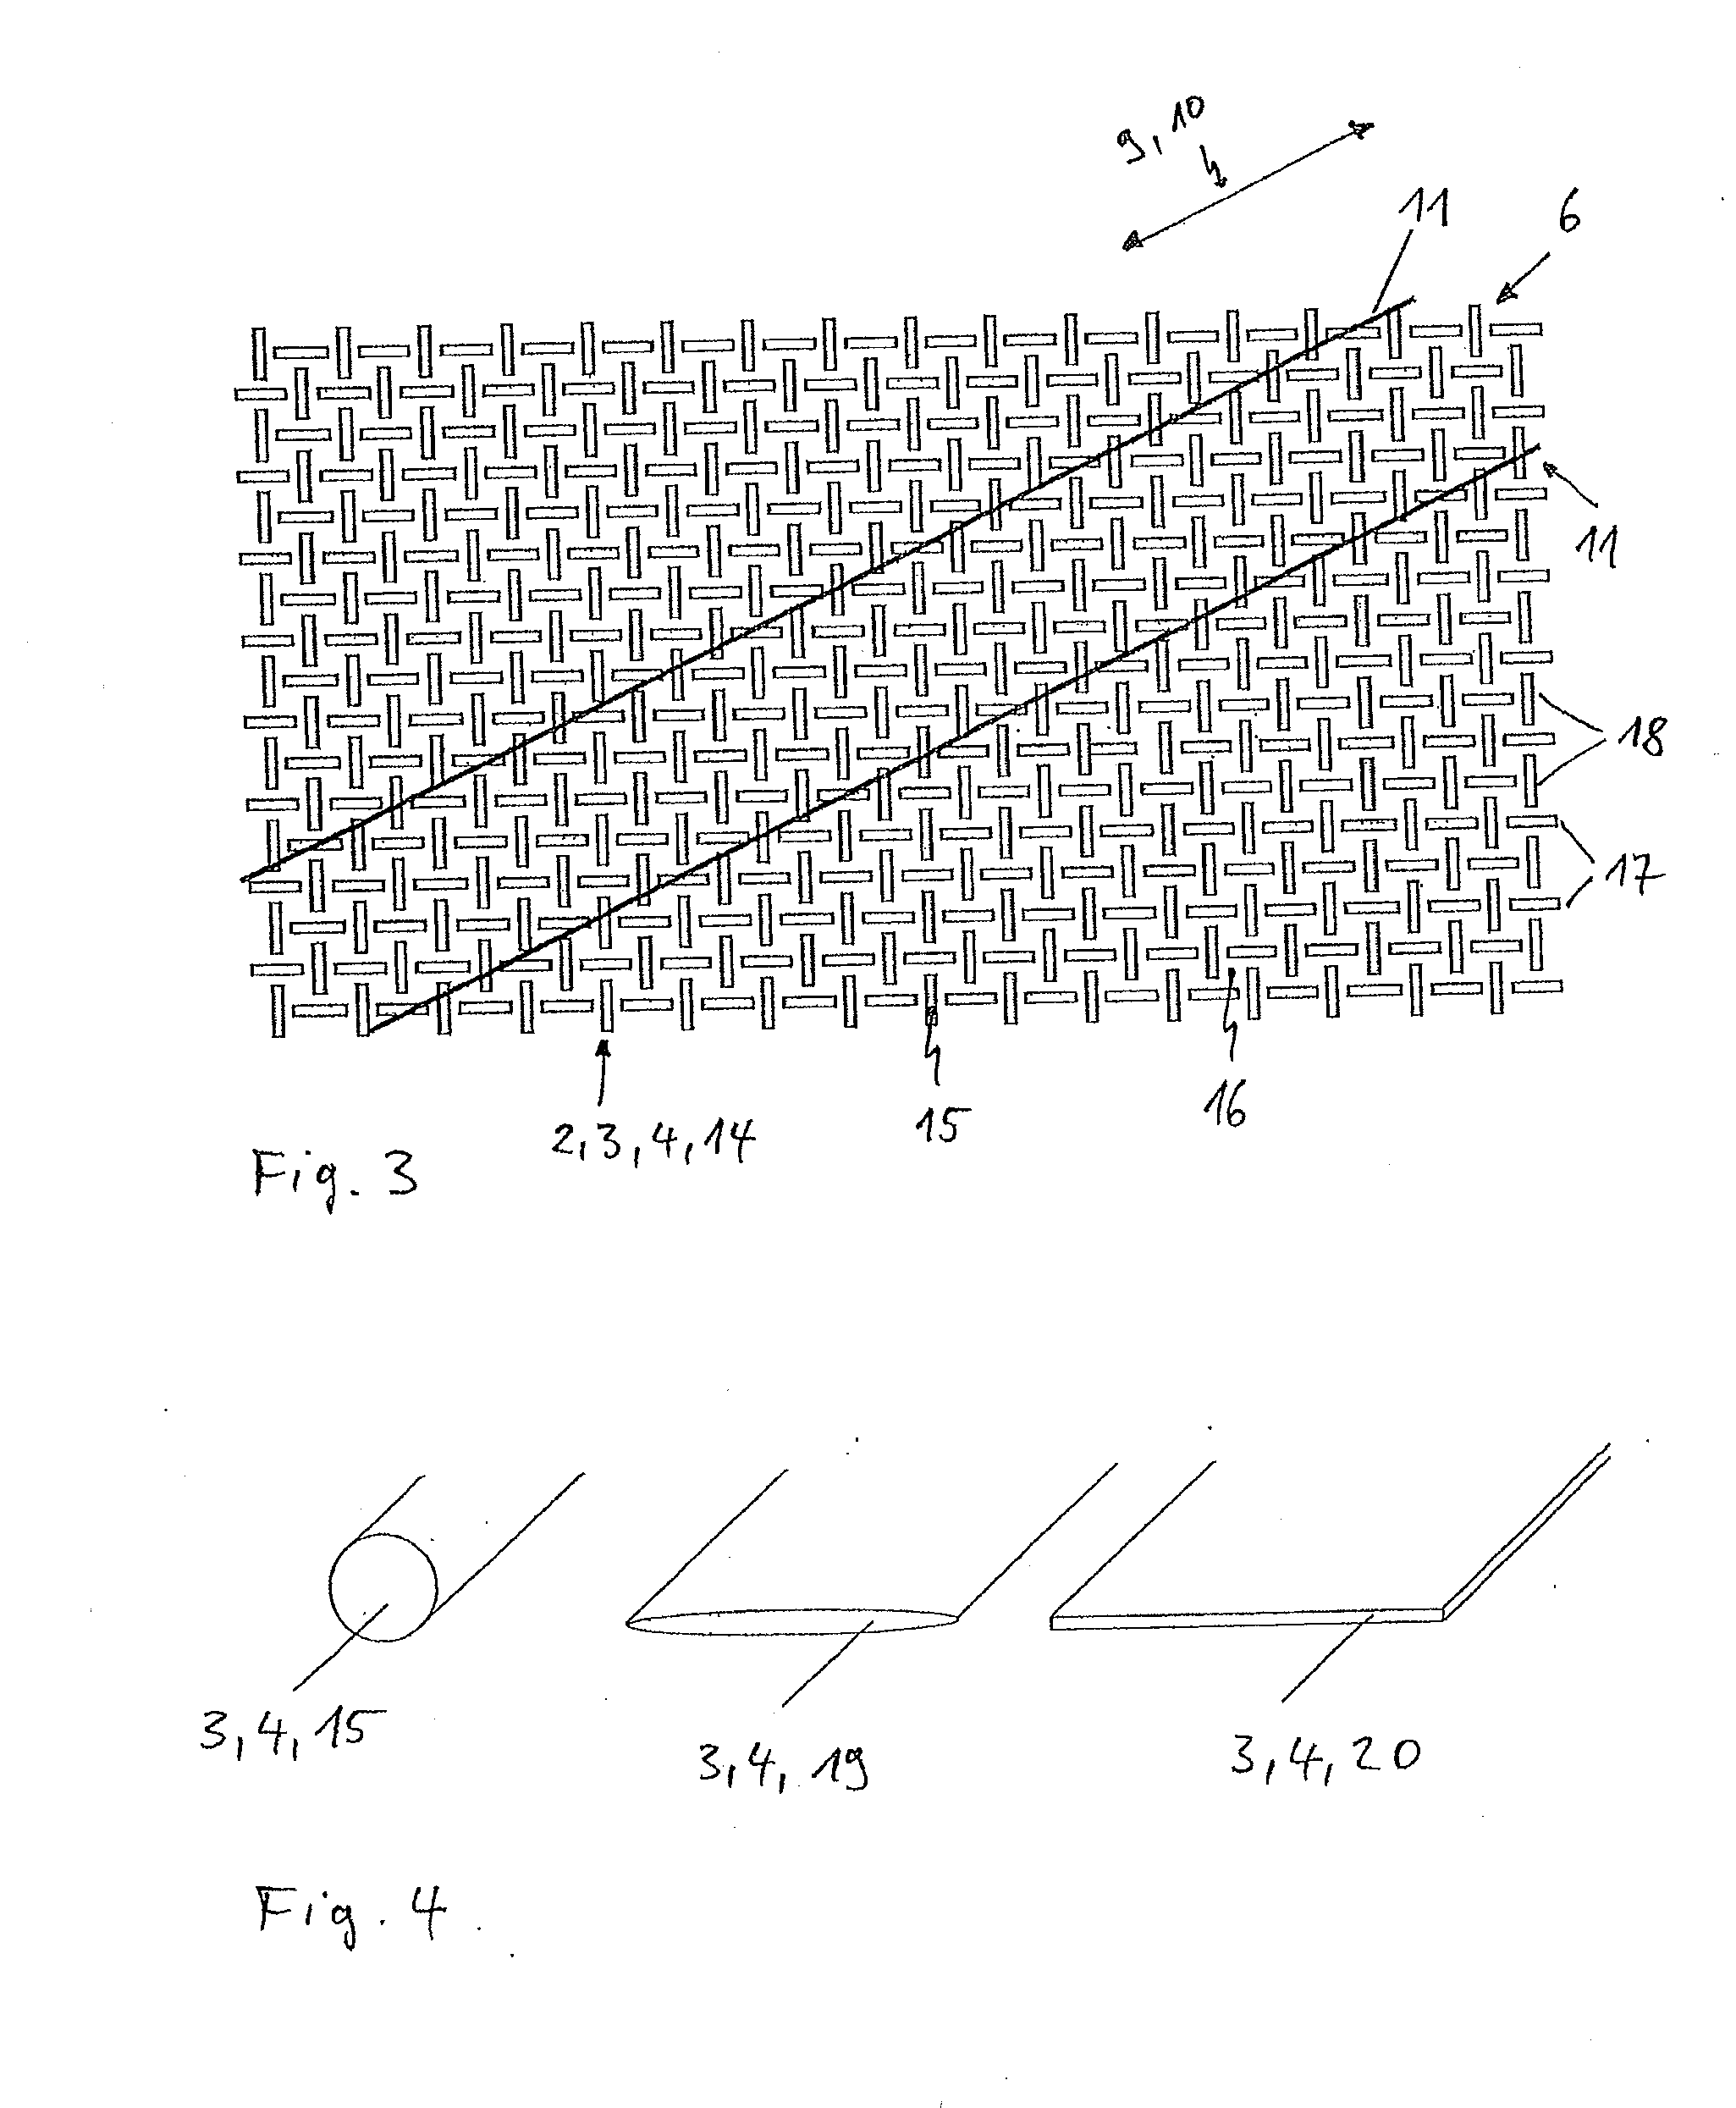 Electrically conductive material, emitter containing electrically conductive material, and method for its manufacture